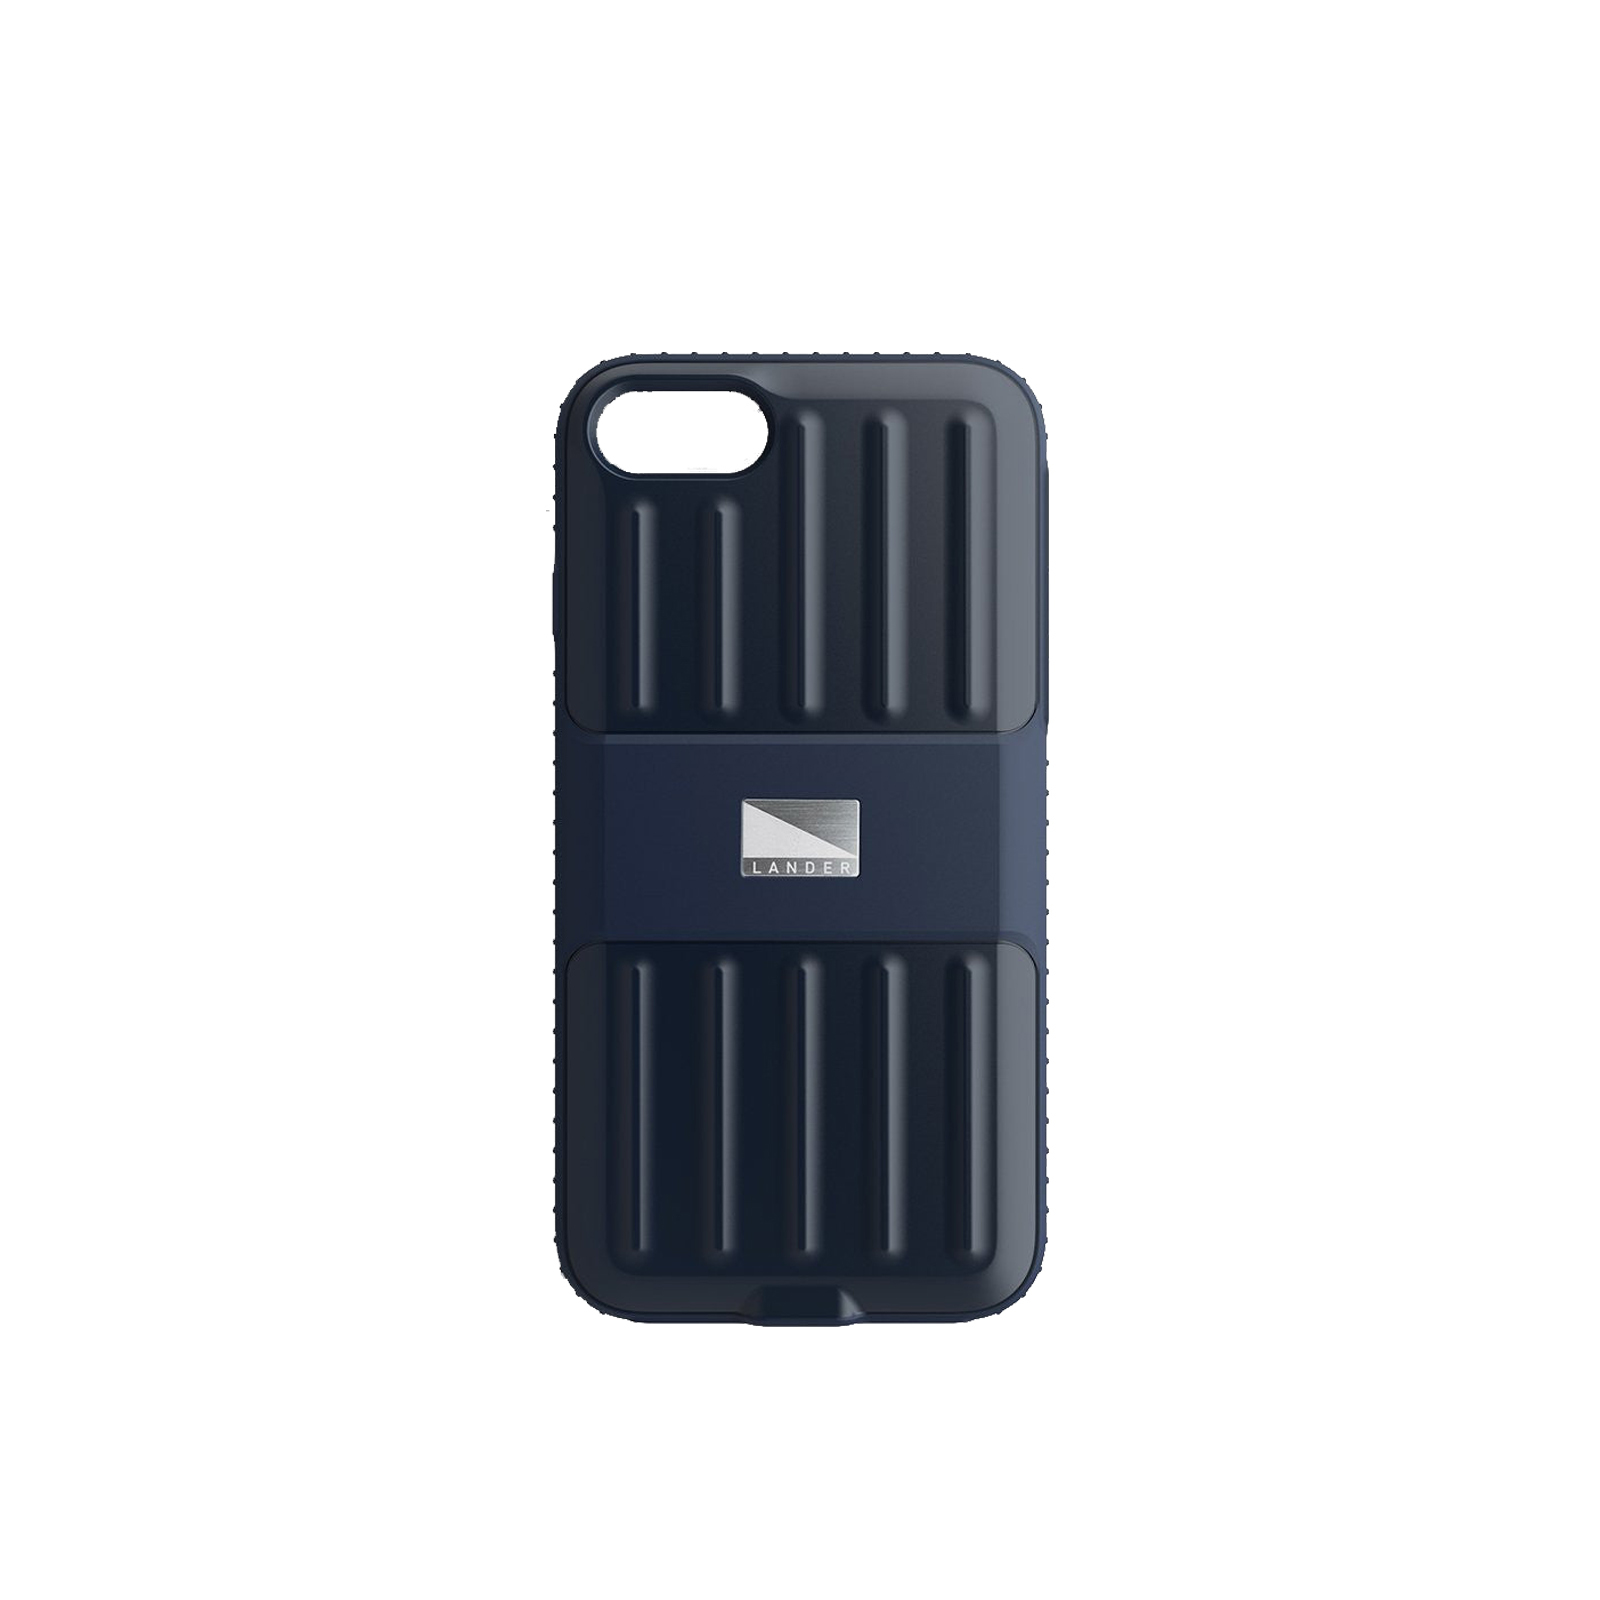 Powell iPhone 7 / 8 Case [Blue]